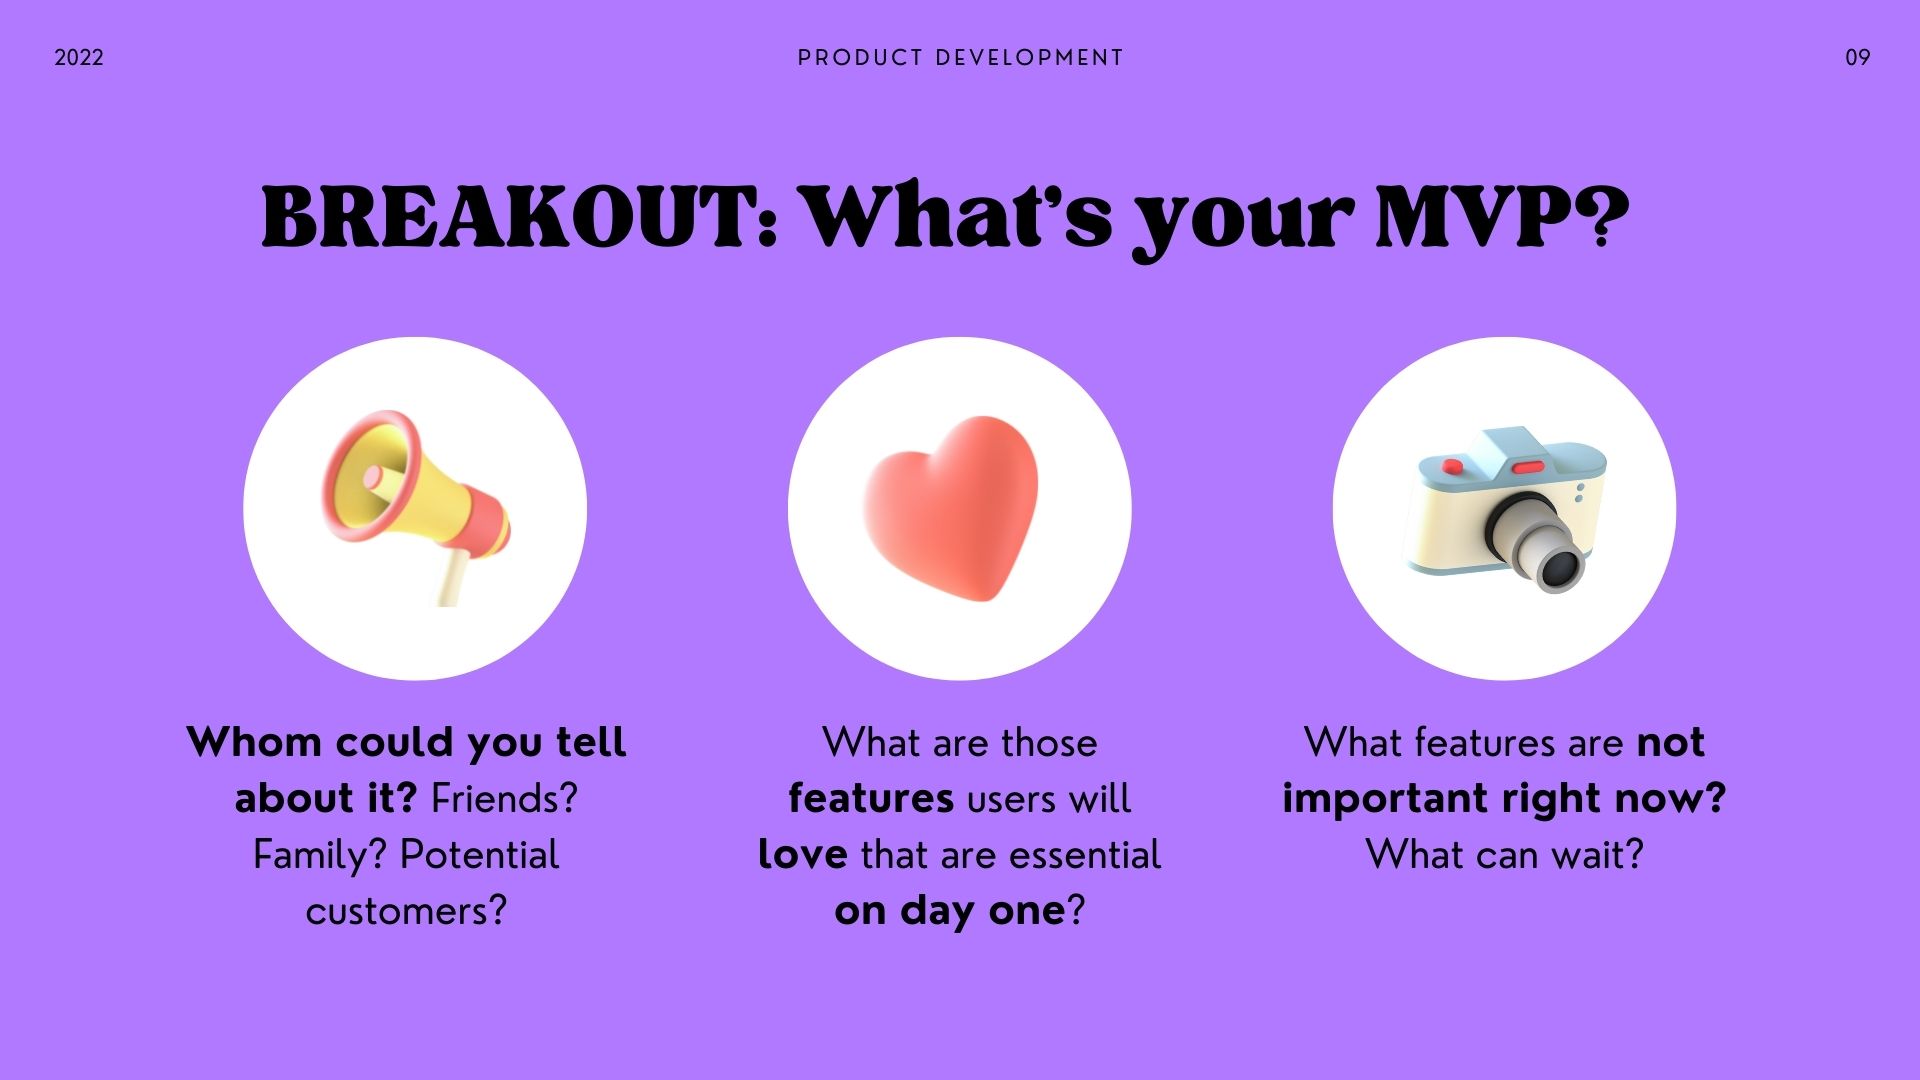 An image asking questions of the group around product development and the MVP